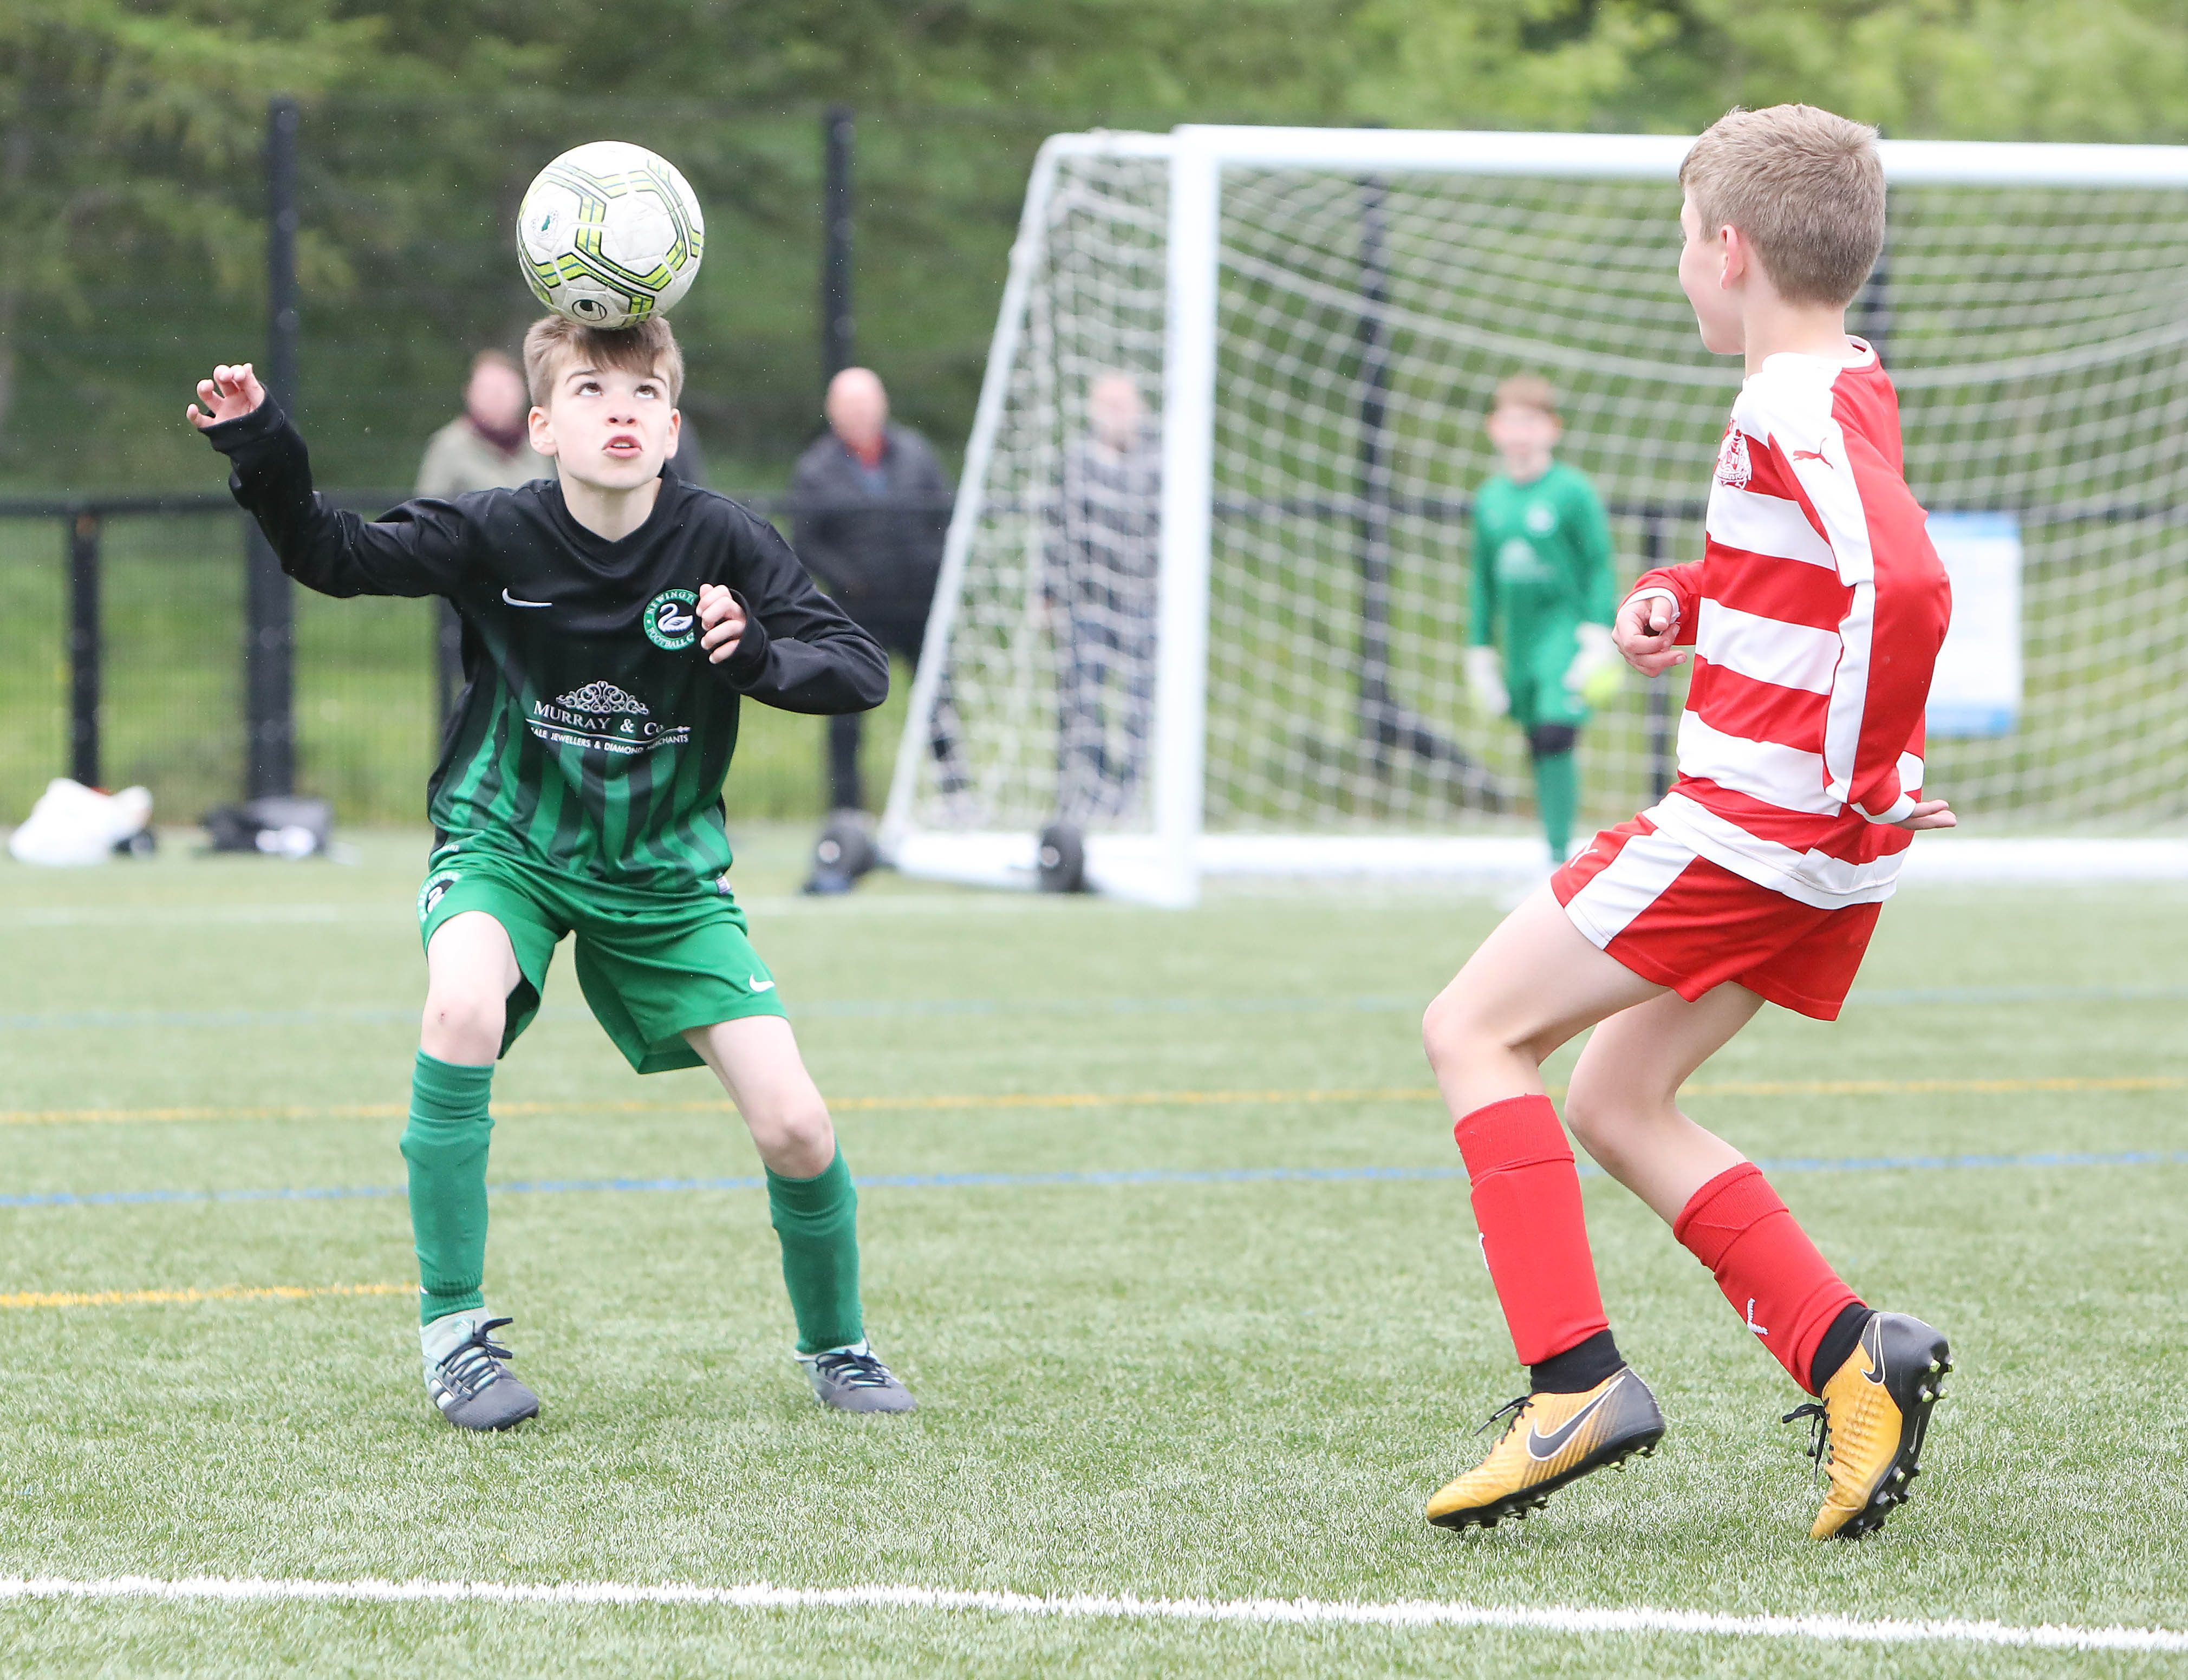 Liam McCann of Newington FC displays some silky skills as his team take on Ballyclare FC in the 2007s Cup Final at the V36 complex, Newtownabbey. The North Belfast lads emerged victorious